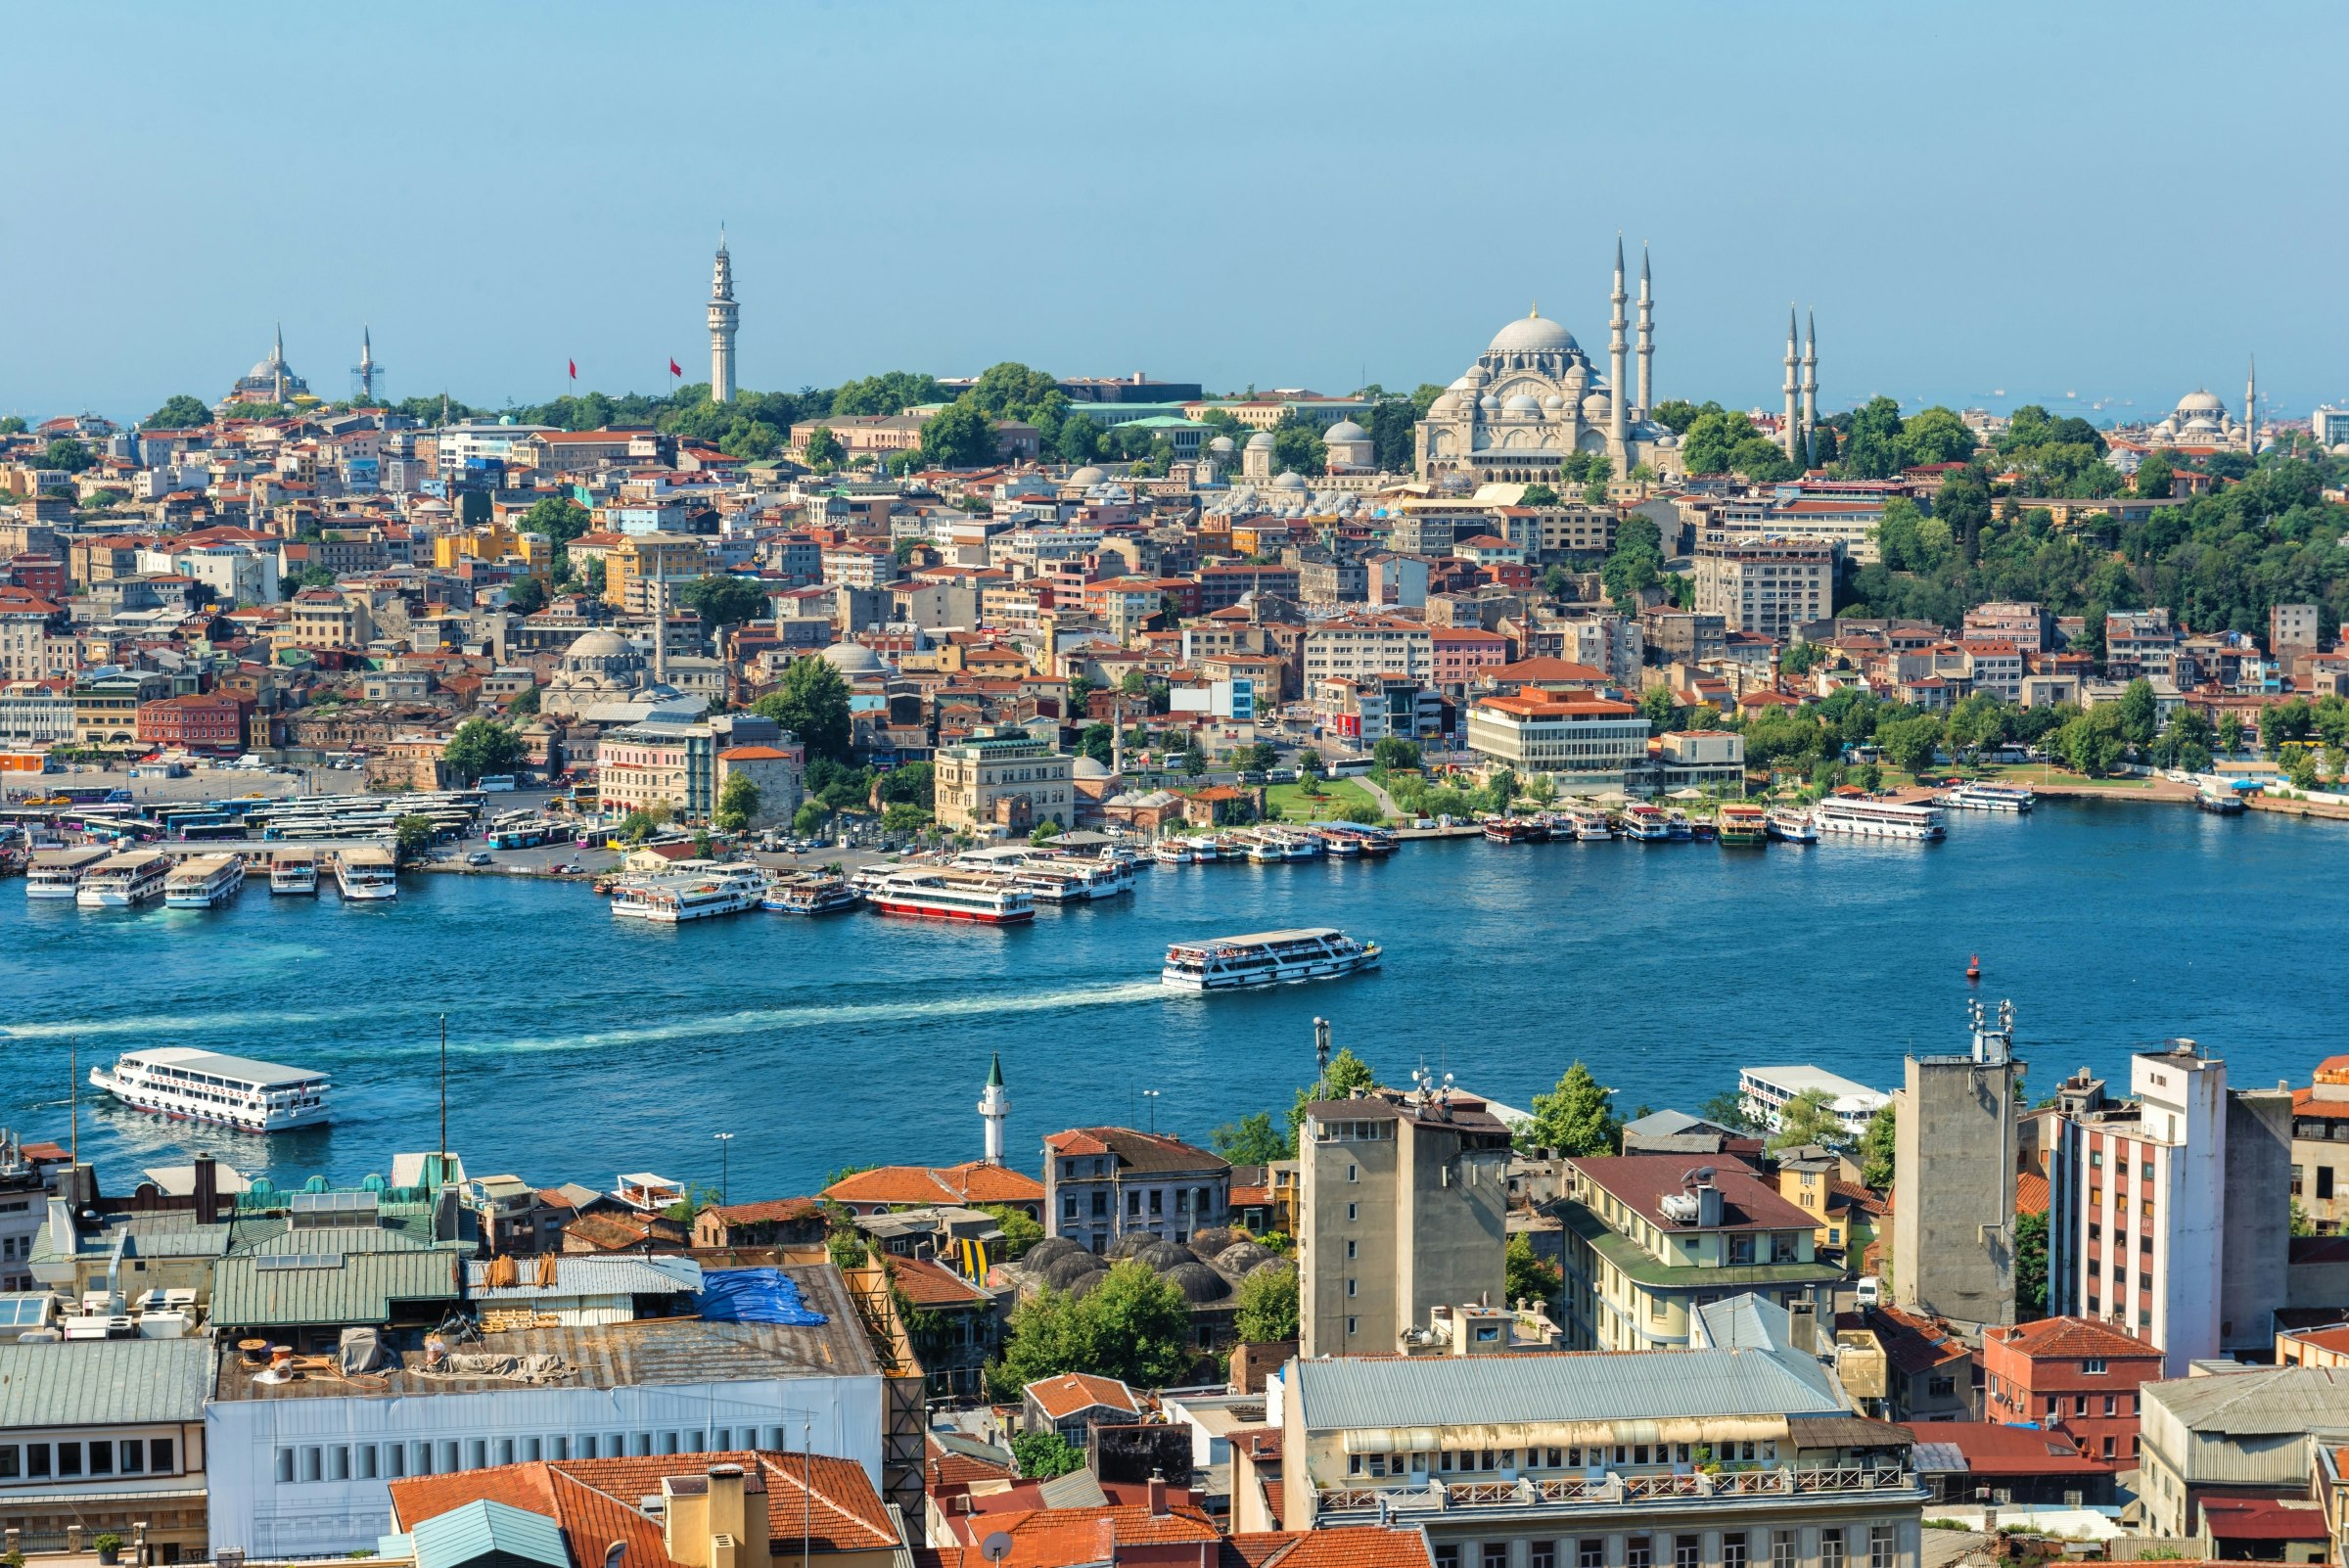 Ferry ships sail up and down the Golden Horn in Istanbul, Turkey 